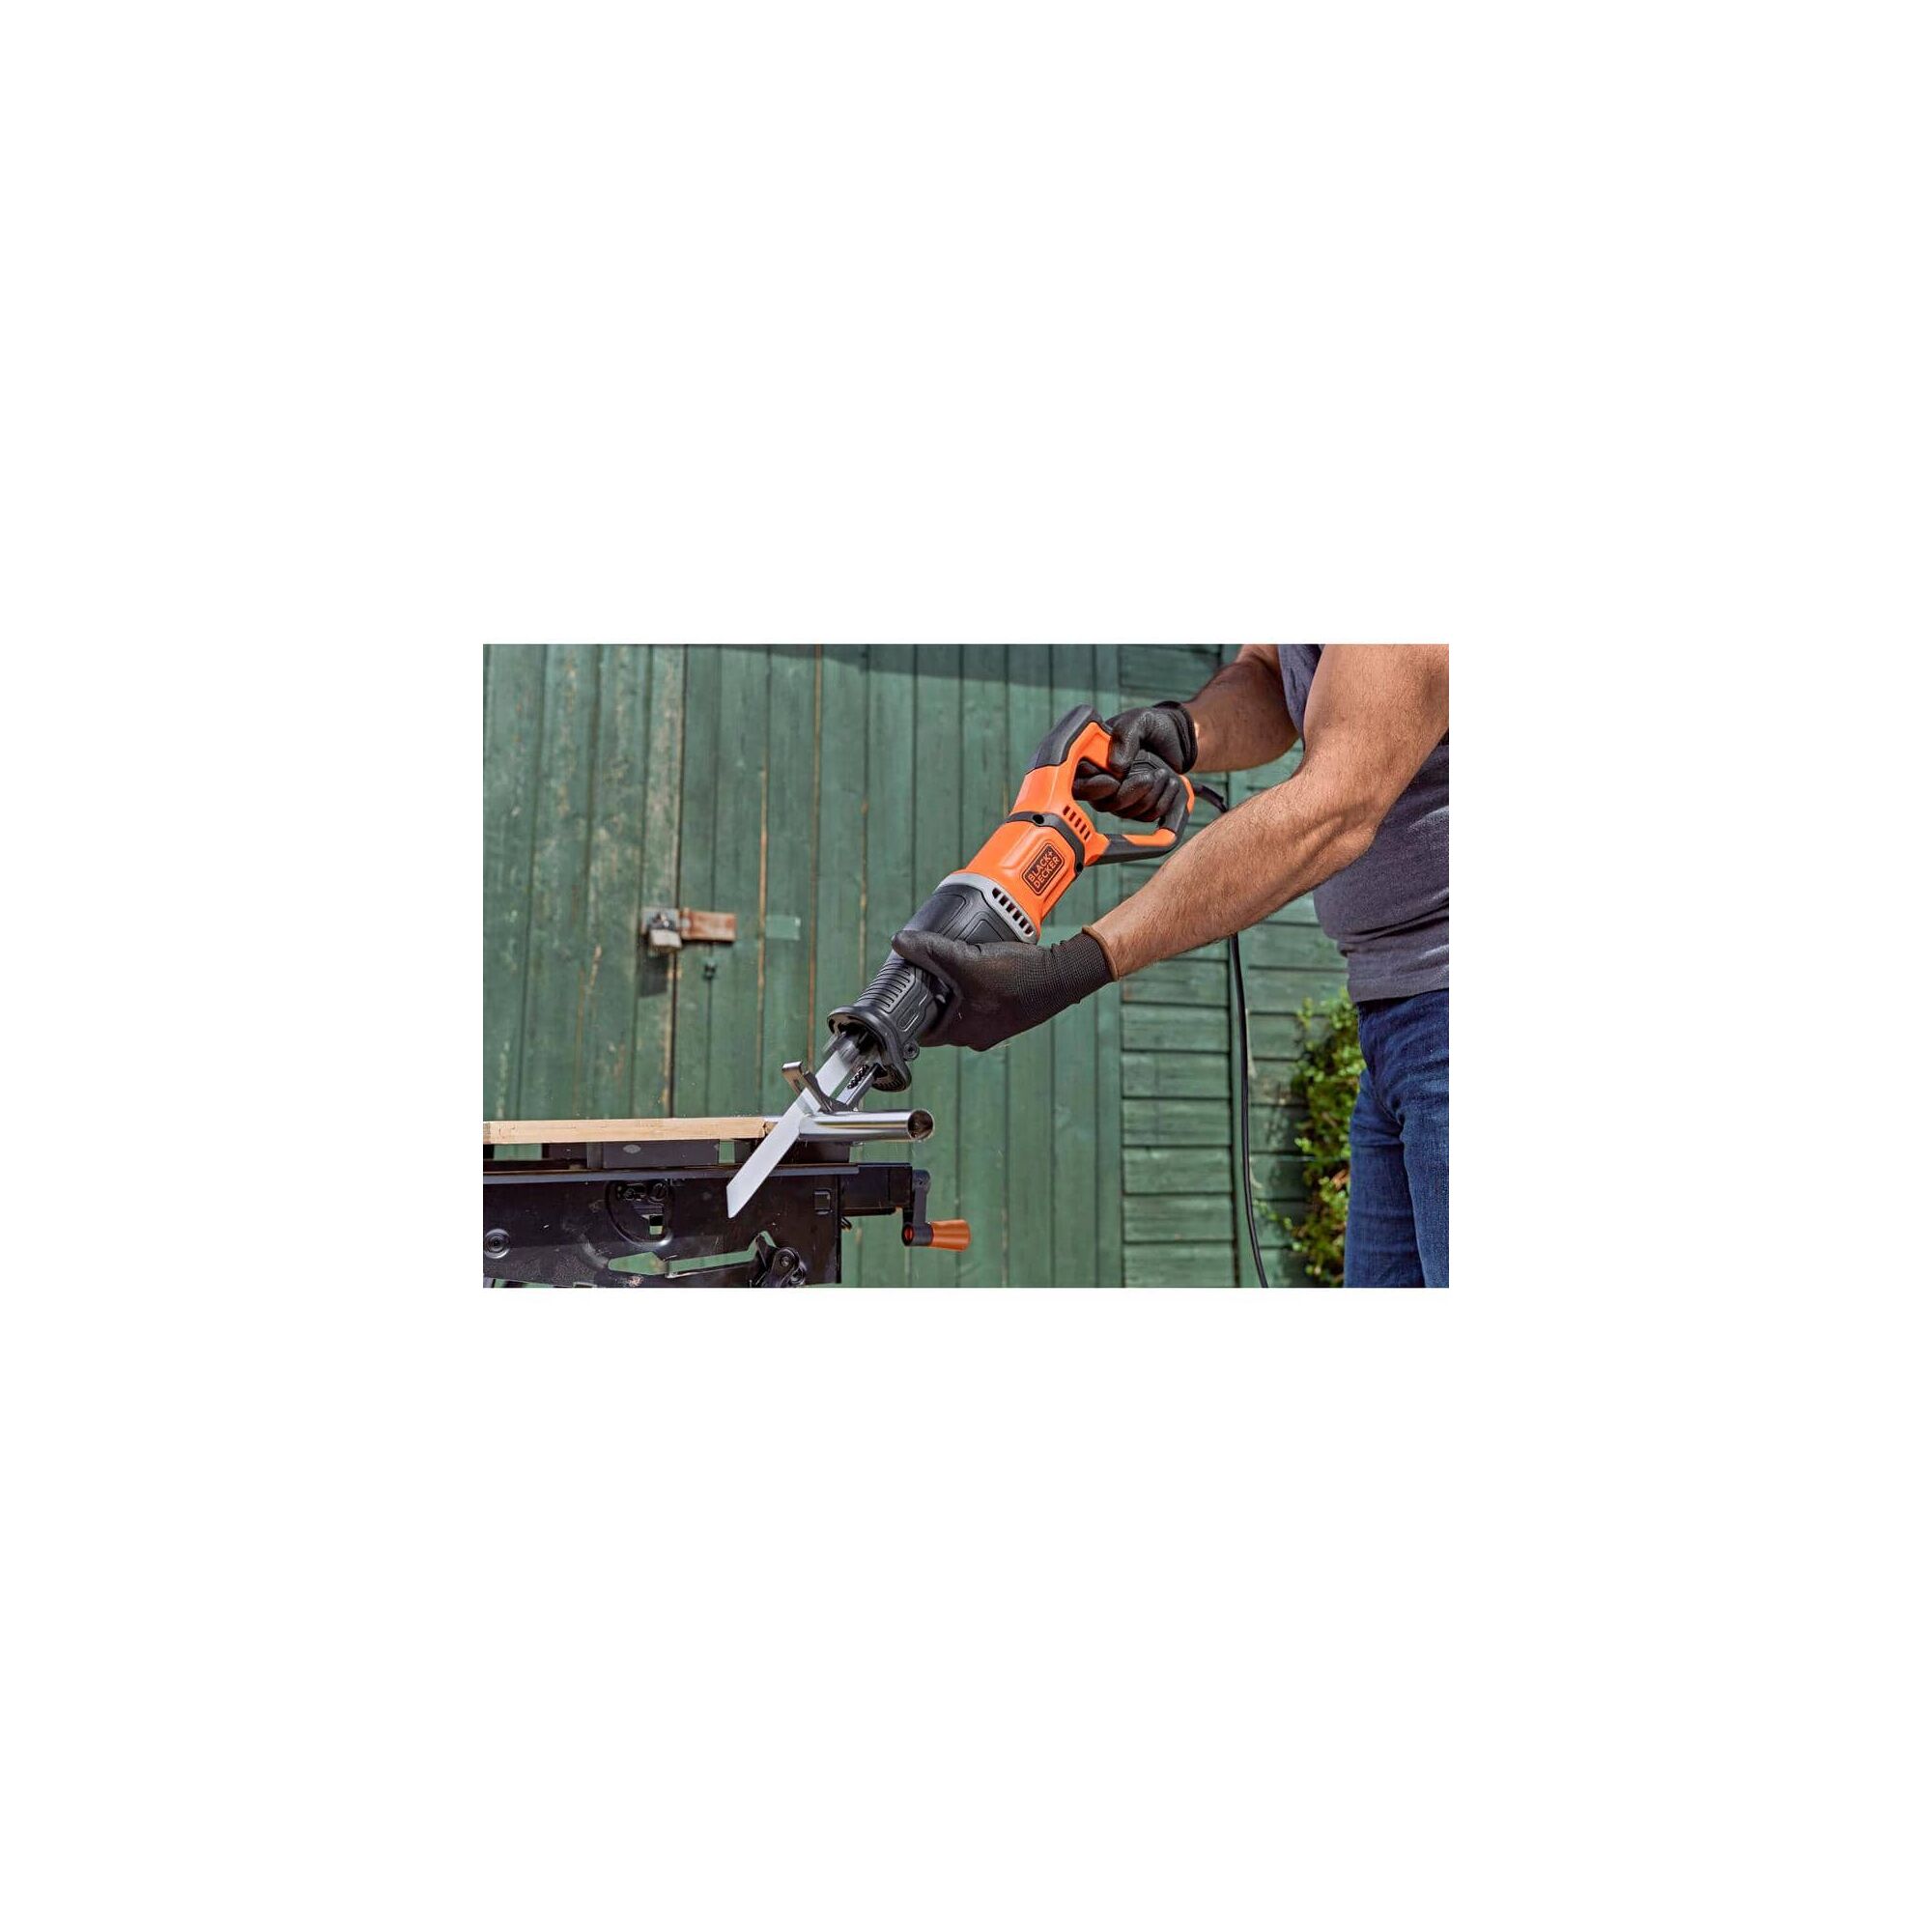 7 Amp Reciprocating Saw with Removeable Branch Holder being used to slice a metal tube by a person.